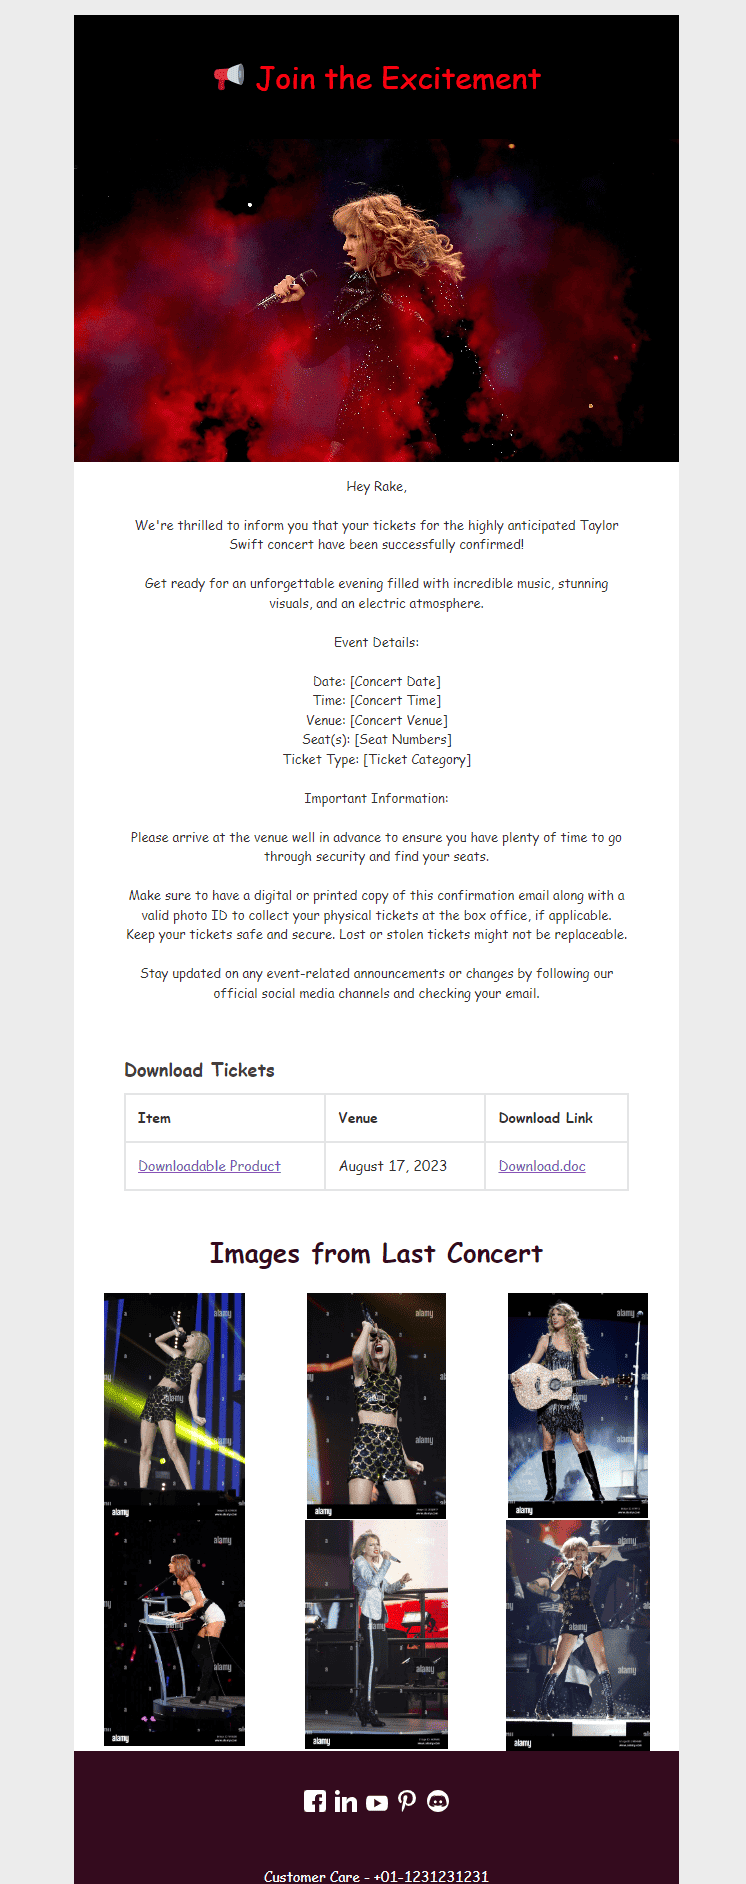 Images and videos of Taylor concert in email body